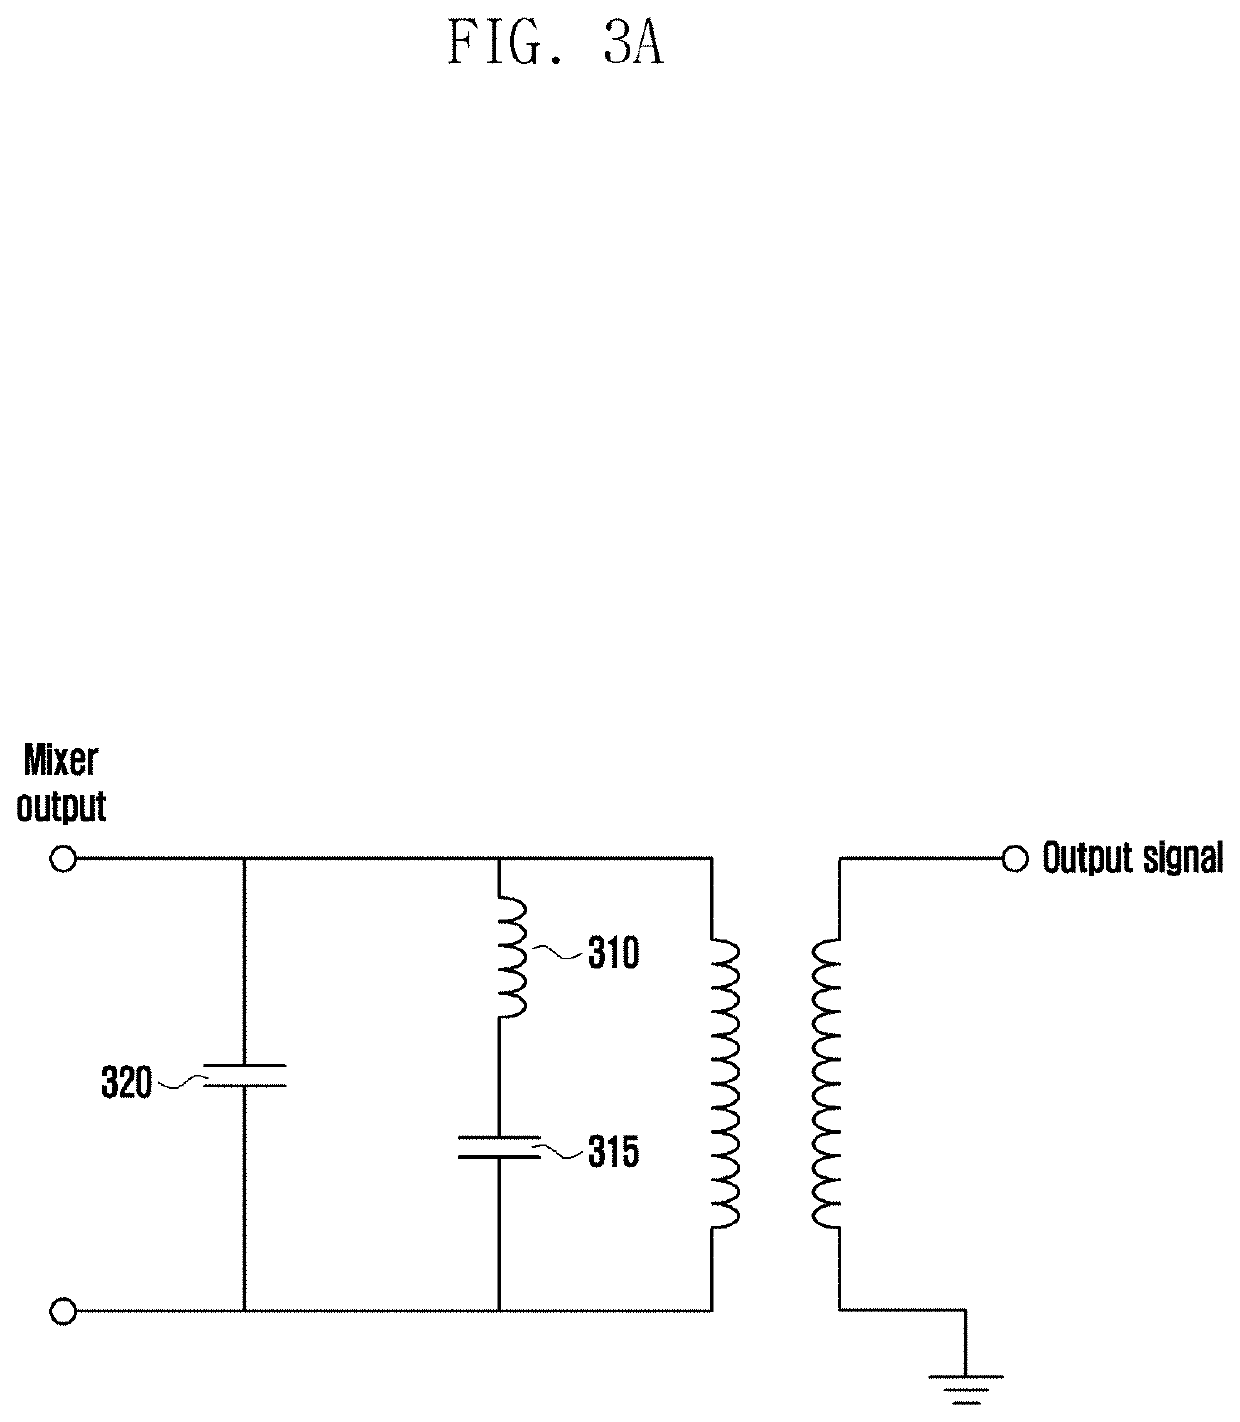 Mixer for reducing local frequency signal generated at output of the mixer